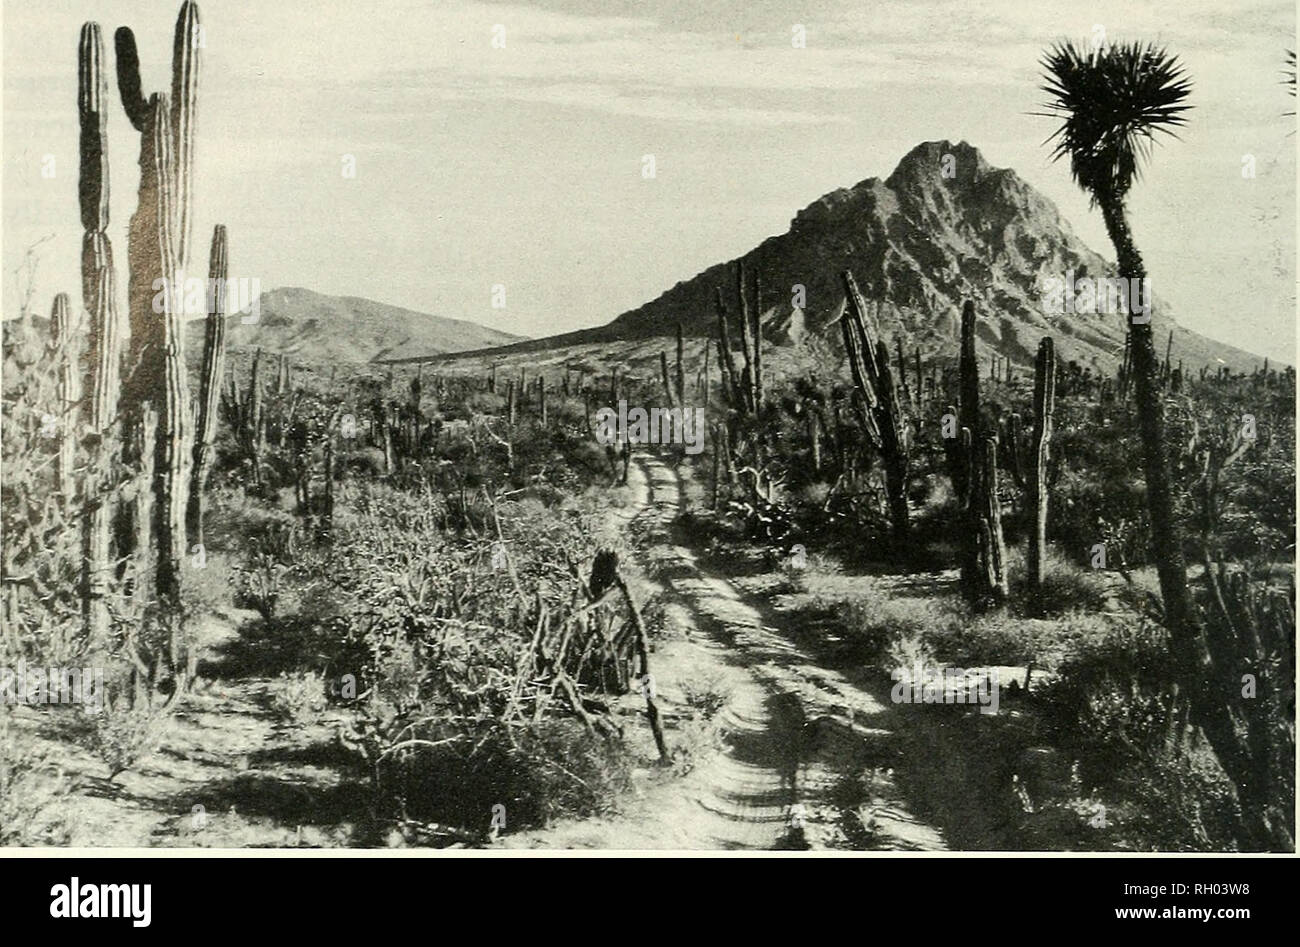 . Bulletin. Science; Natural history; Natural history. 74 SOUTHERN CALIFORNIA ACADEMY OF SCIENCES. Fig. 22. Typical Xantusia vigilis habitat from within the Sierra Santa Clara. the Sierra Santa Clara but not confirmed by us are Leptotyphlops humilis, Chilome- niscus cinctus, Masticophis flageUum, Lampropeltis getula, and Pituophis mela- noleuciis. We would be surprised if these latter taxa did not occur throughout the Vizcaino Peninsula owing to the wide range of habitats they occupy elsewhere in Baja California and the fact that they are known from other Vizcaino Desert localities further eas Stock Photo